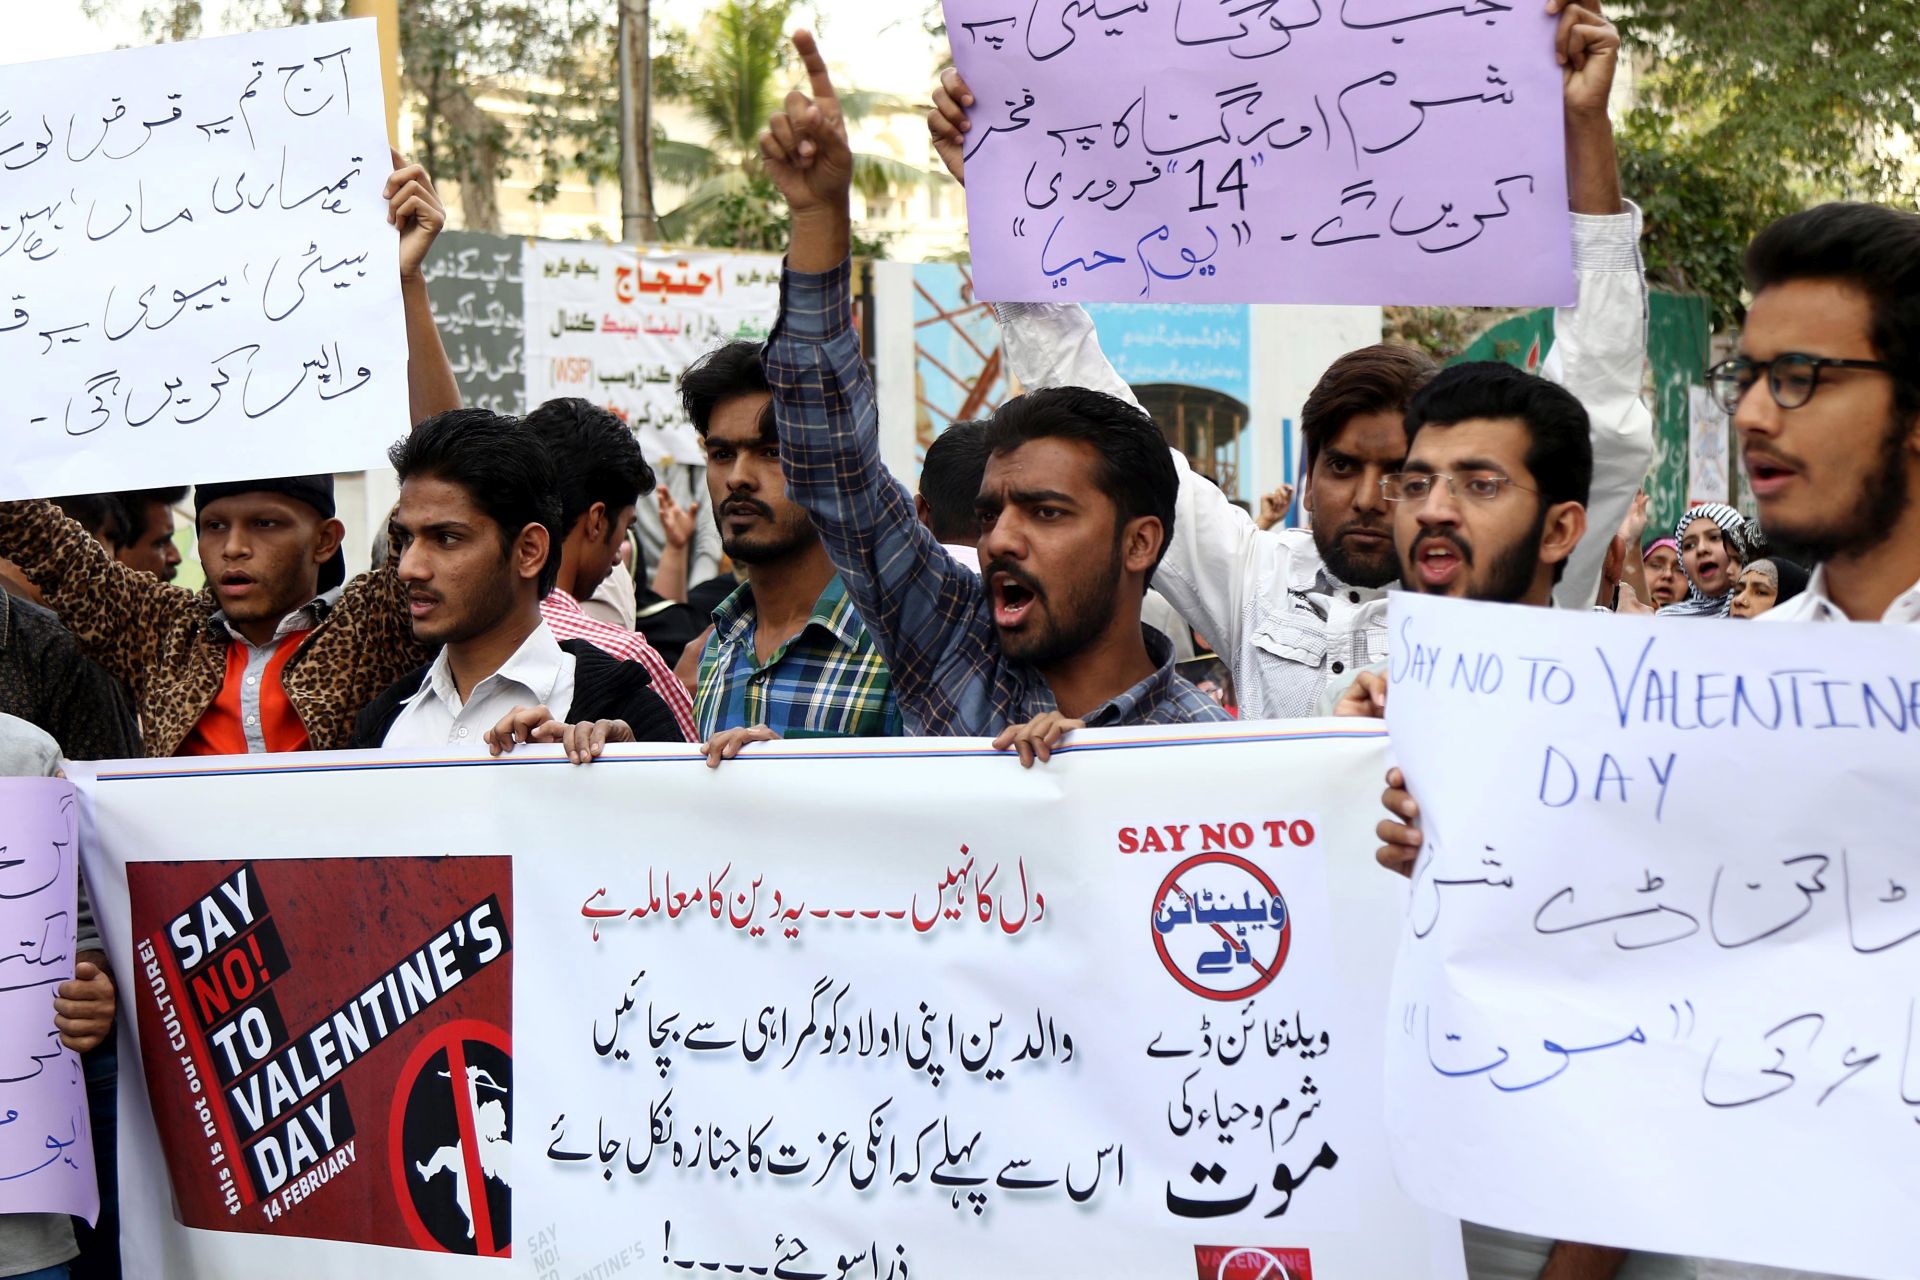 epa05788608 People shout slogans during a protest against Valentine's Day in Karachi, Pakistan, 12 February 2017. Valentines Day, which is celebrated worldwide on 14 February each year, is considered to be un-Islamic in Pakistan.  EPA/REHAN KHAN